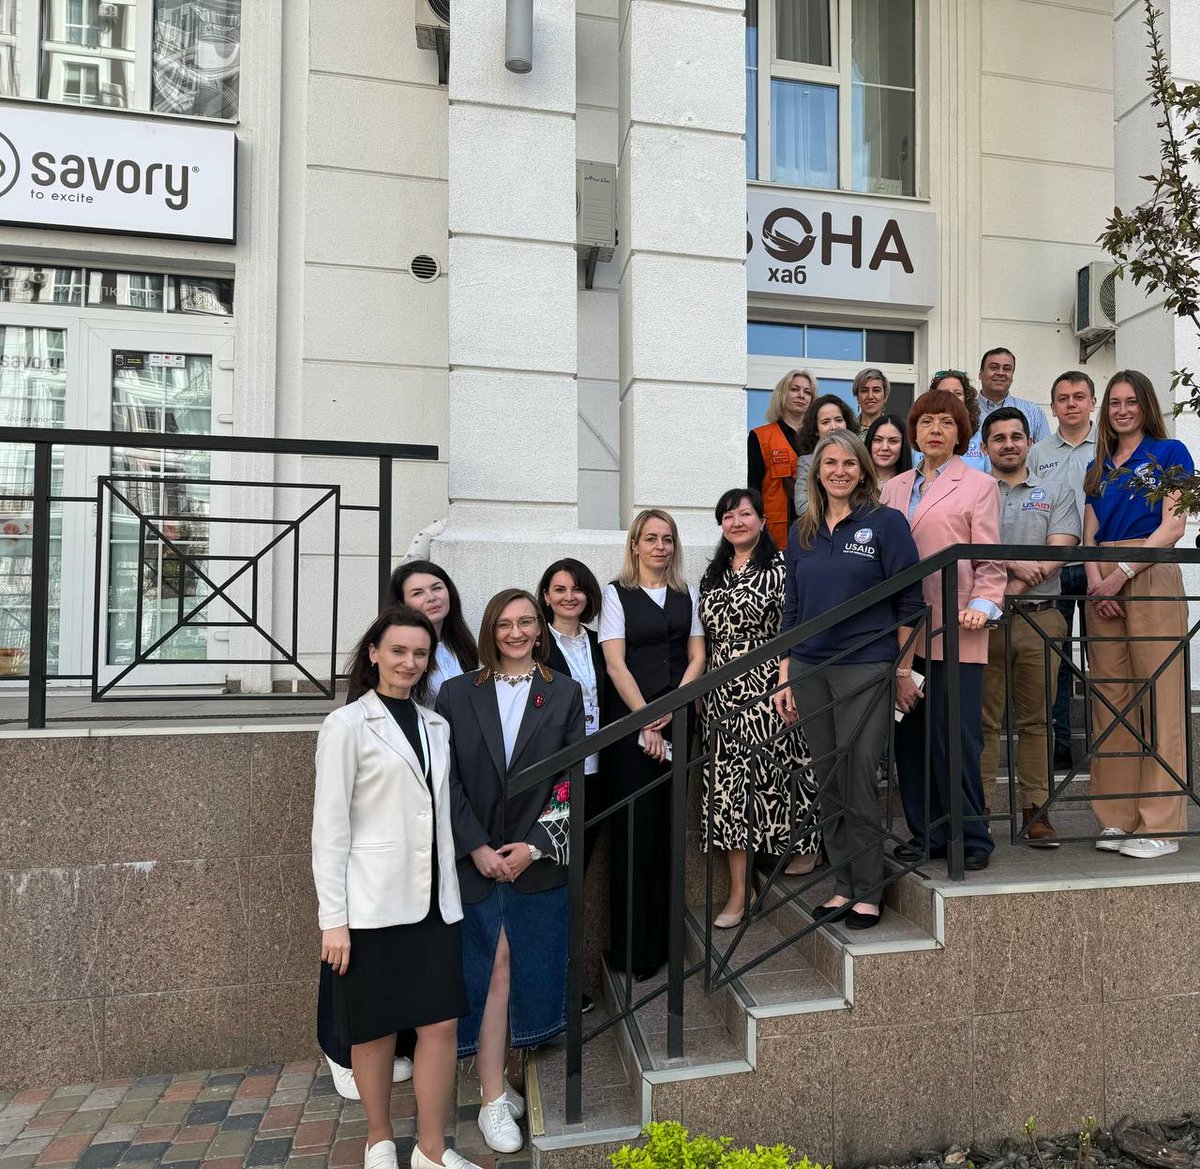 Recently, @USAID experts, including DAA Dianna Darsney de Salcedo & Regional Office Director Emily Dakin, visited Ukraine to see first-hand how partner @UNFPA's vital gender-based violence & psychosocial support services are changing the lives of conflict-affected women & girls.